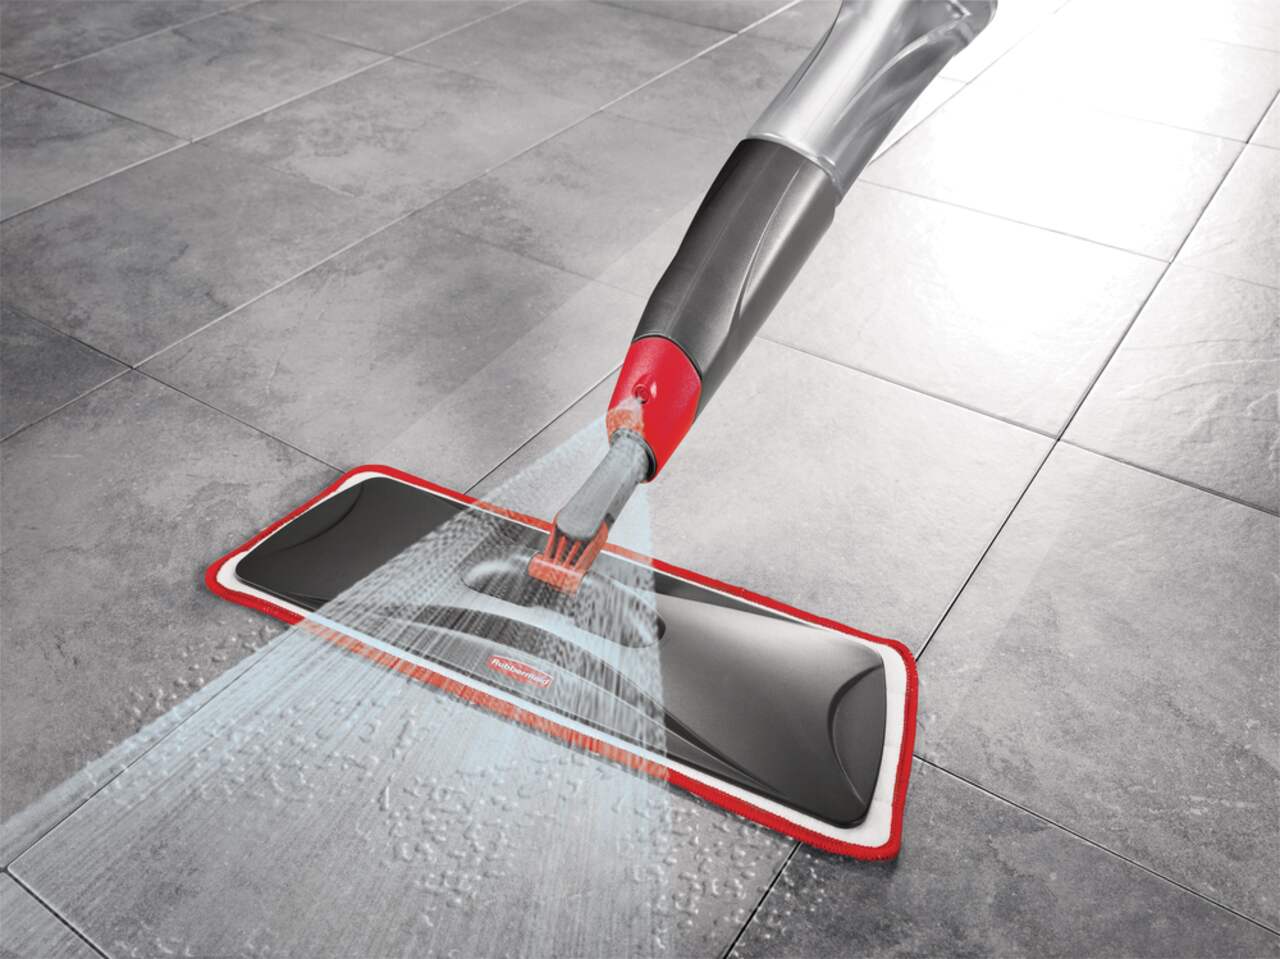 https://media-www.canadiantire.ca/product/living/cleaning/household-cleaning-tools/1420039/reveal-spray-mop-47076a47-d41c-4792-83d1-905db5725145.png?imdensity=1&imwidth=1244&impolicy=mZoom